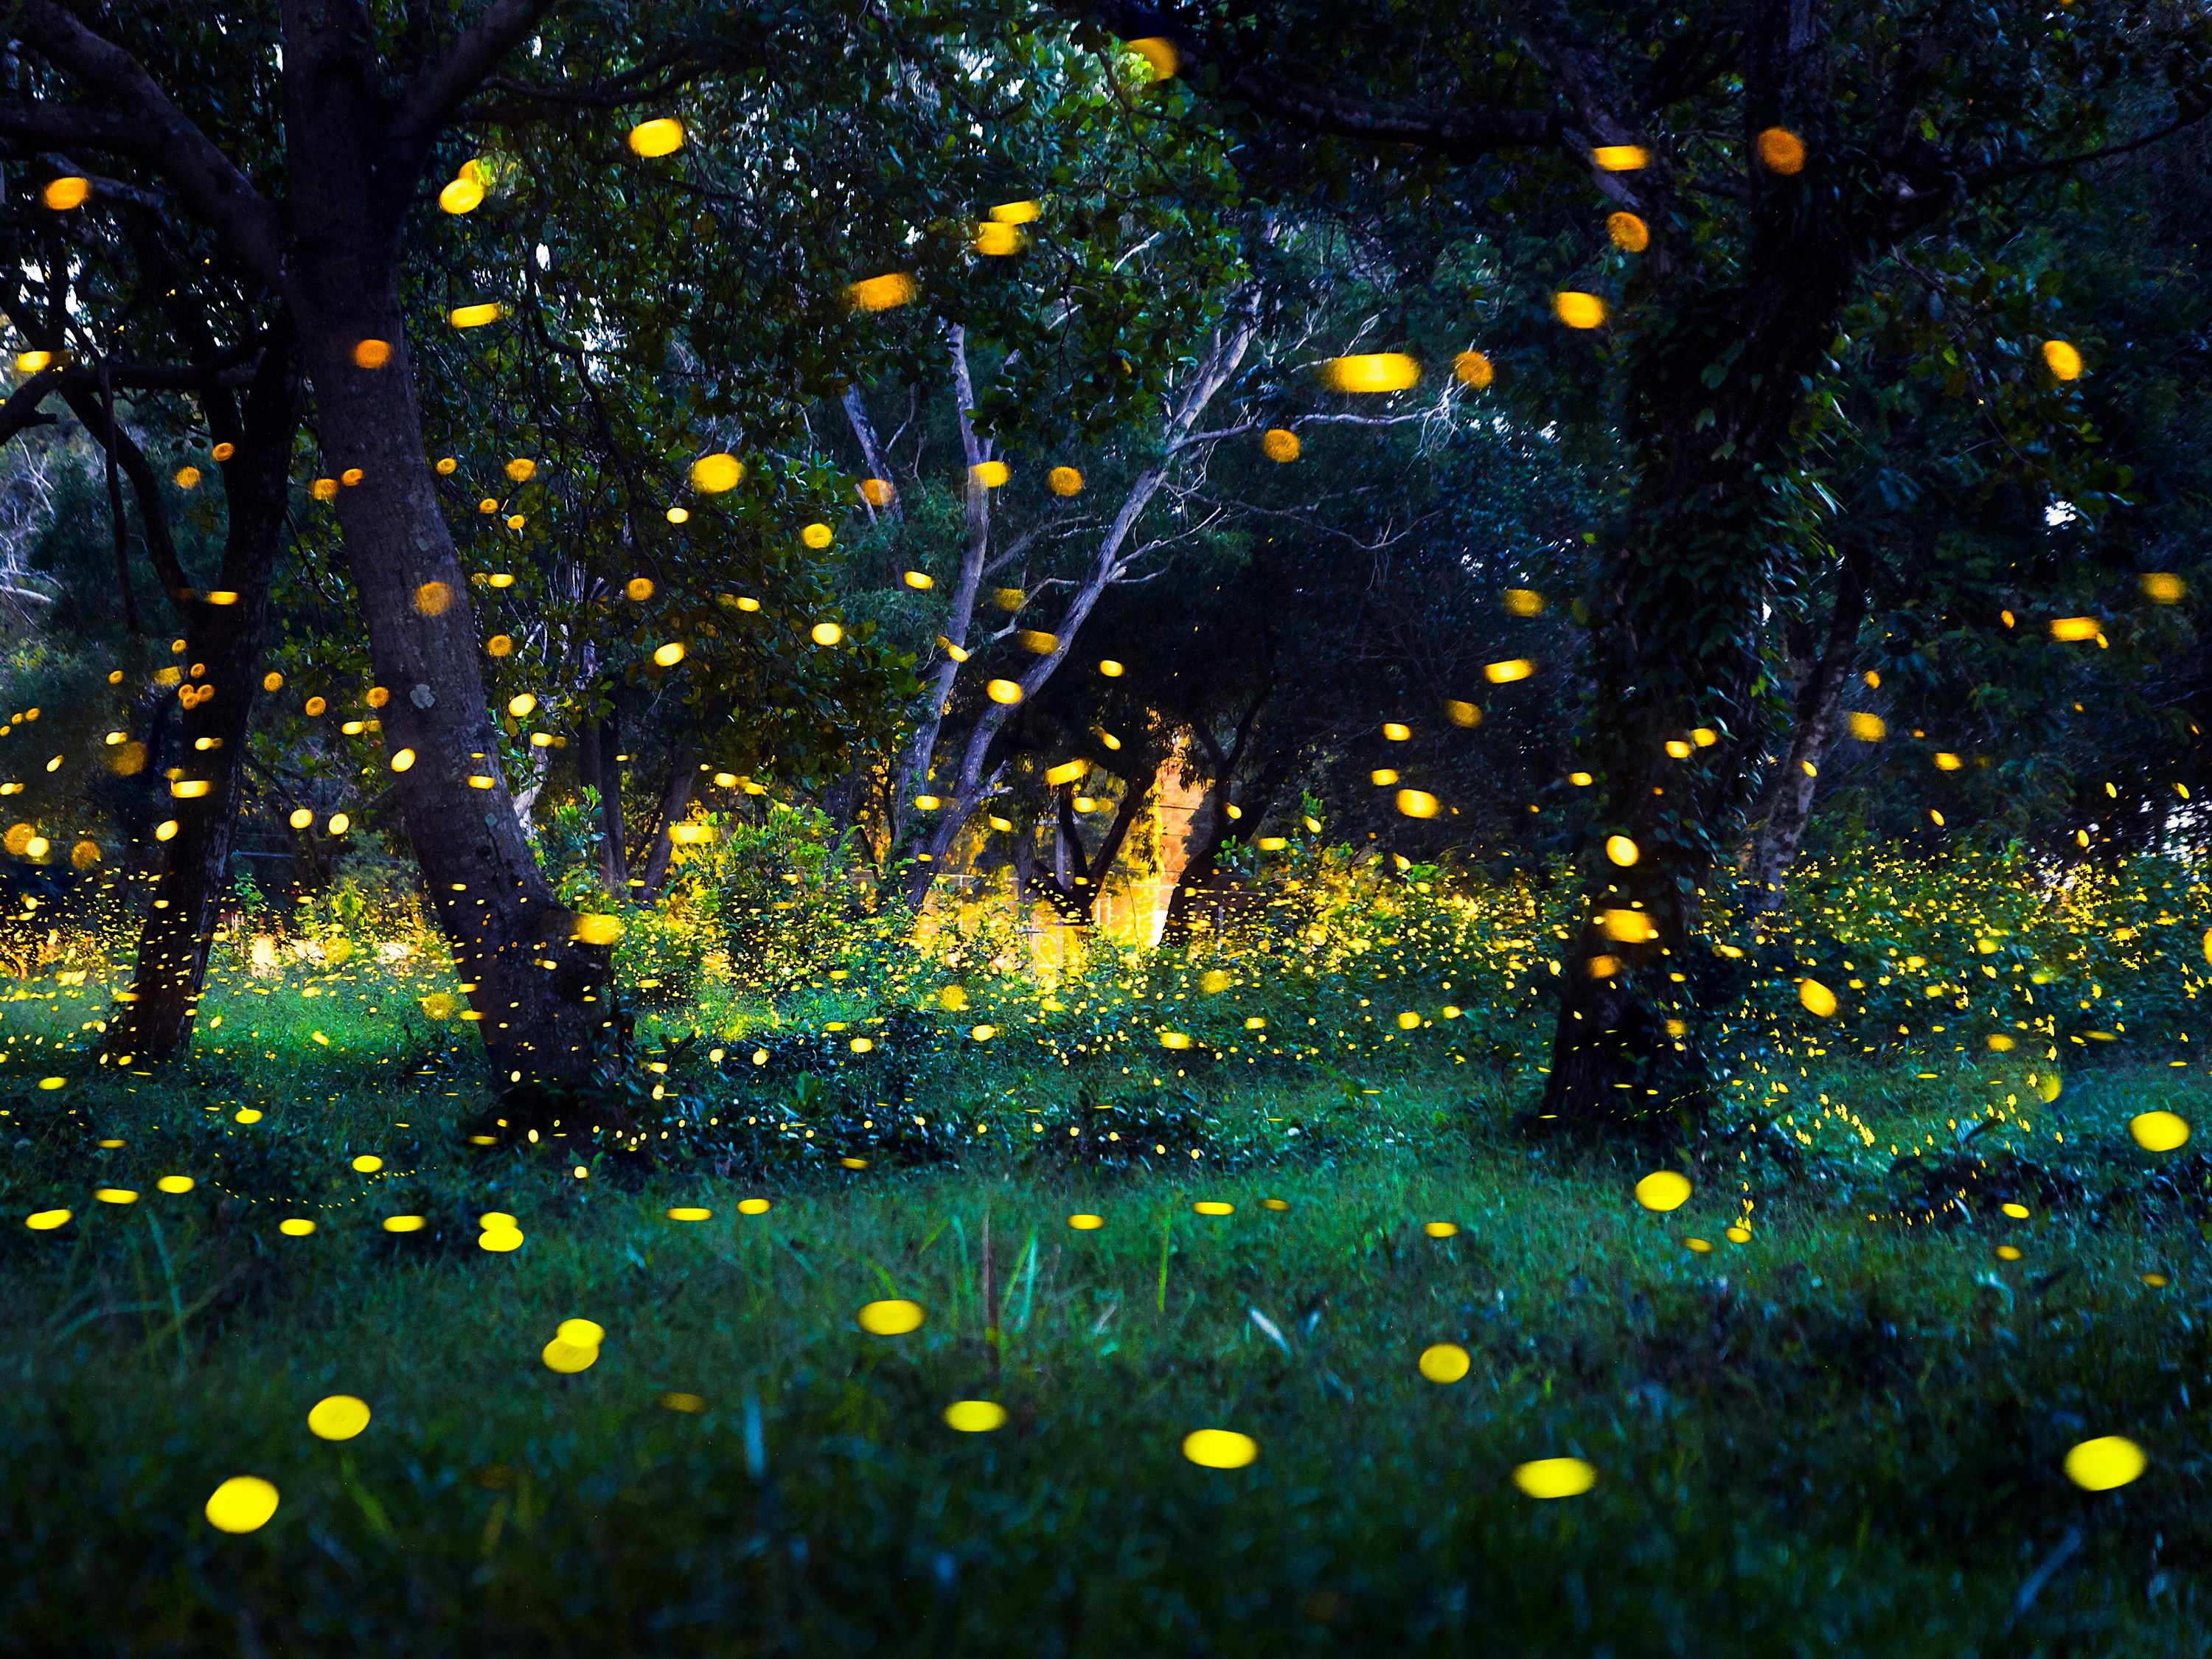 Watch the Great Smoky Mountains' famous fireflies online